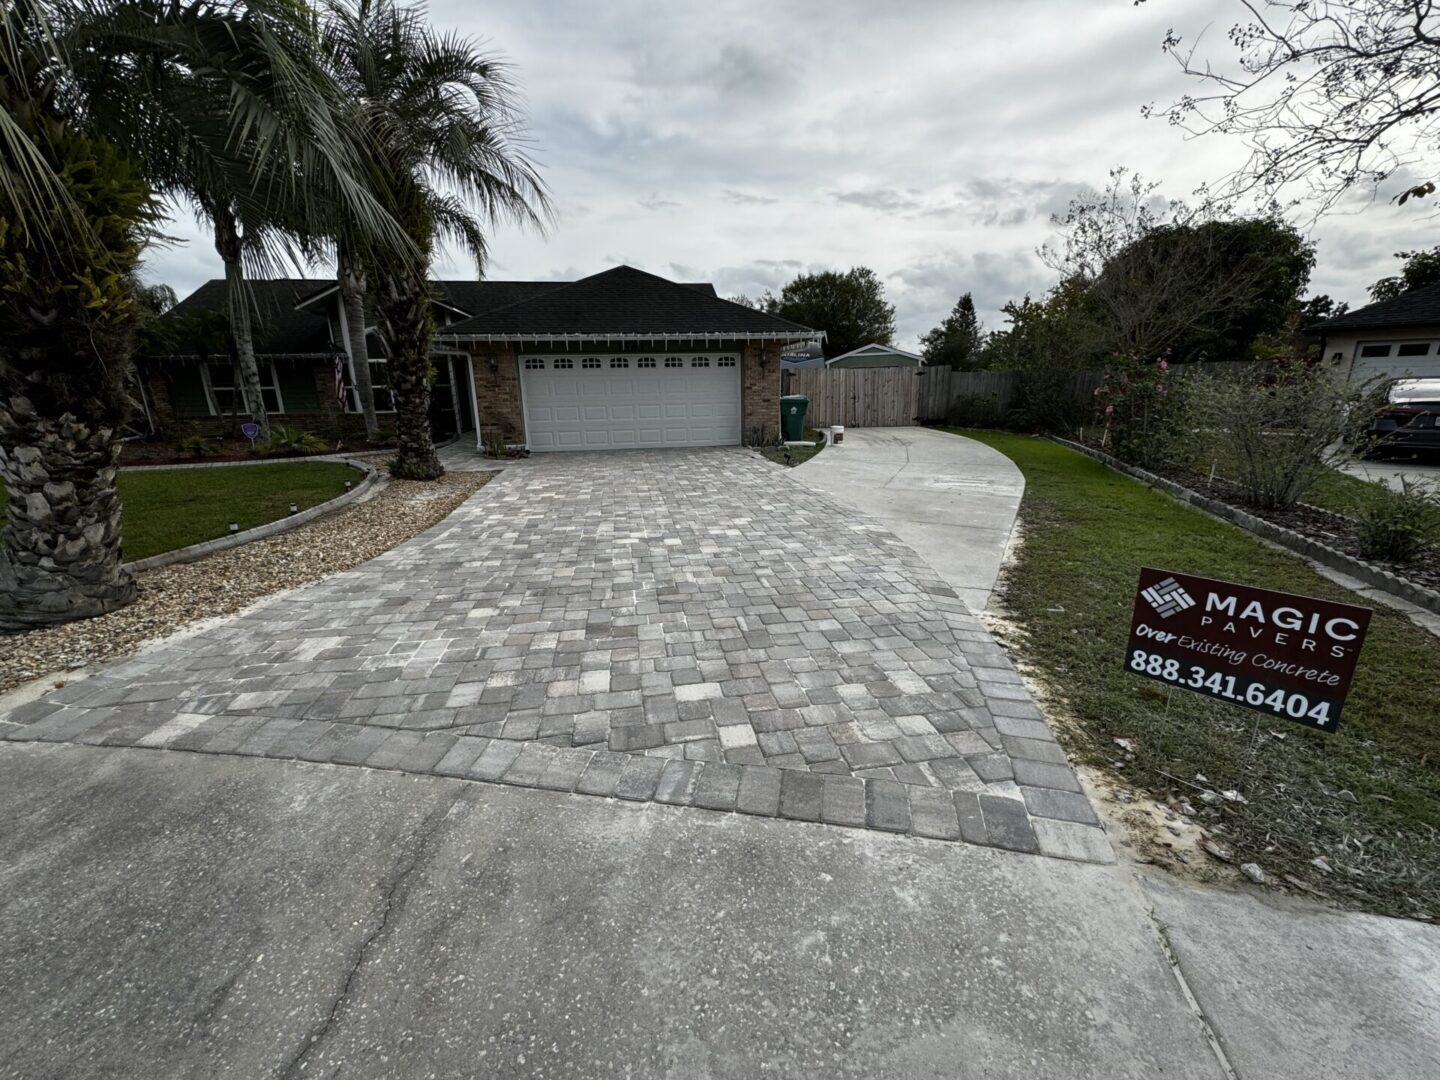 A house with a newly paved stone driveway and garage is shown. A sign on the lawn reads, 